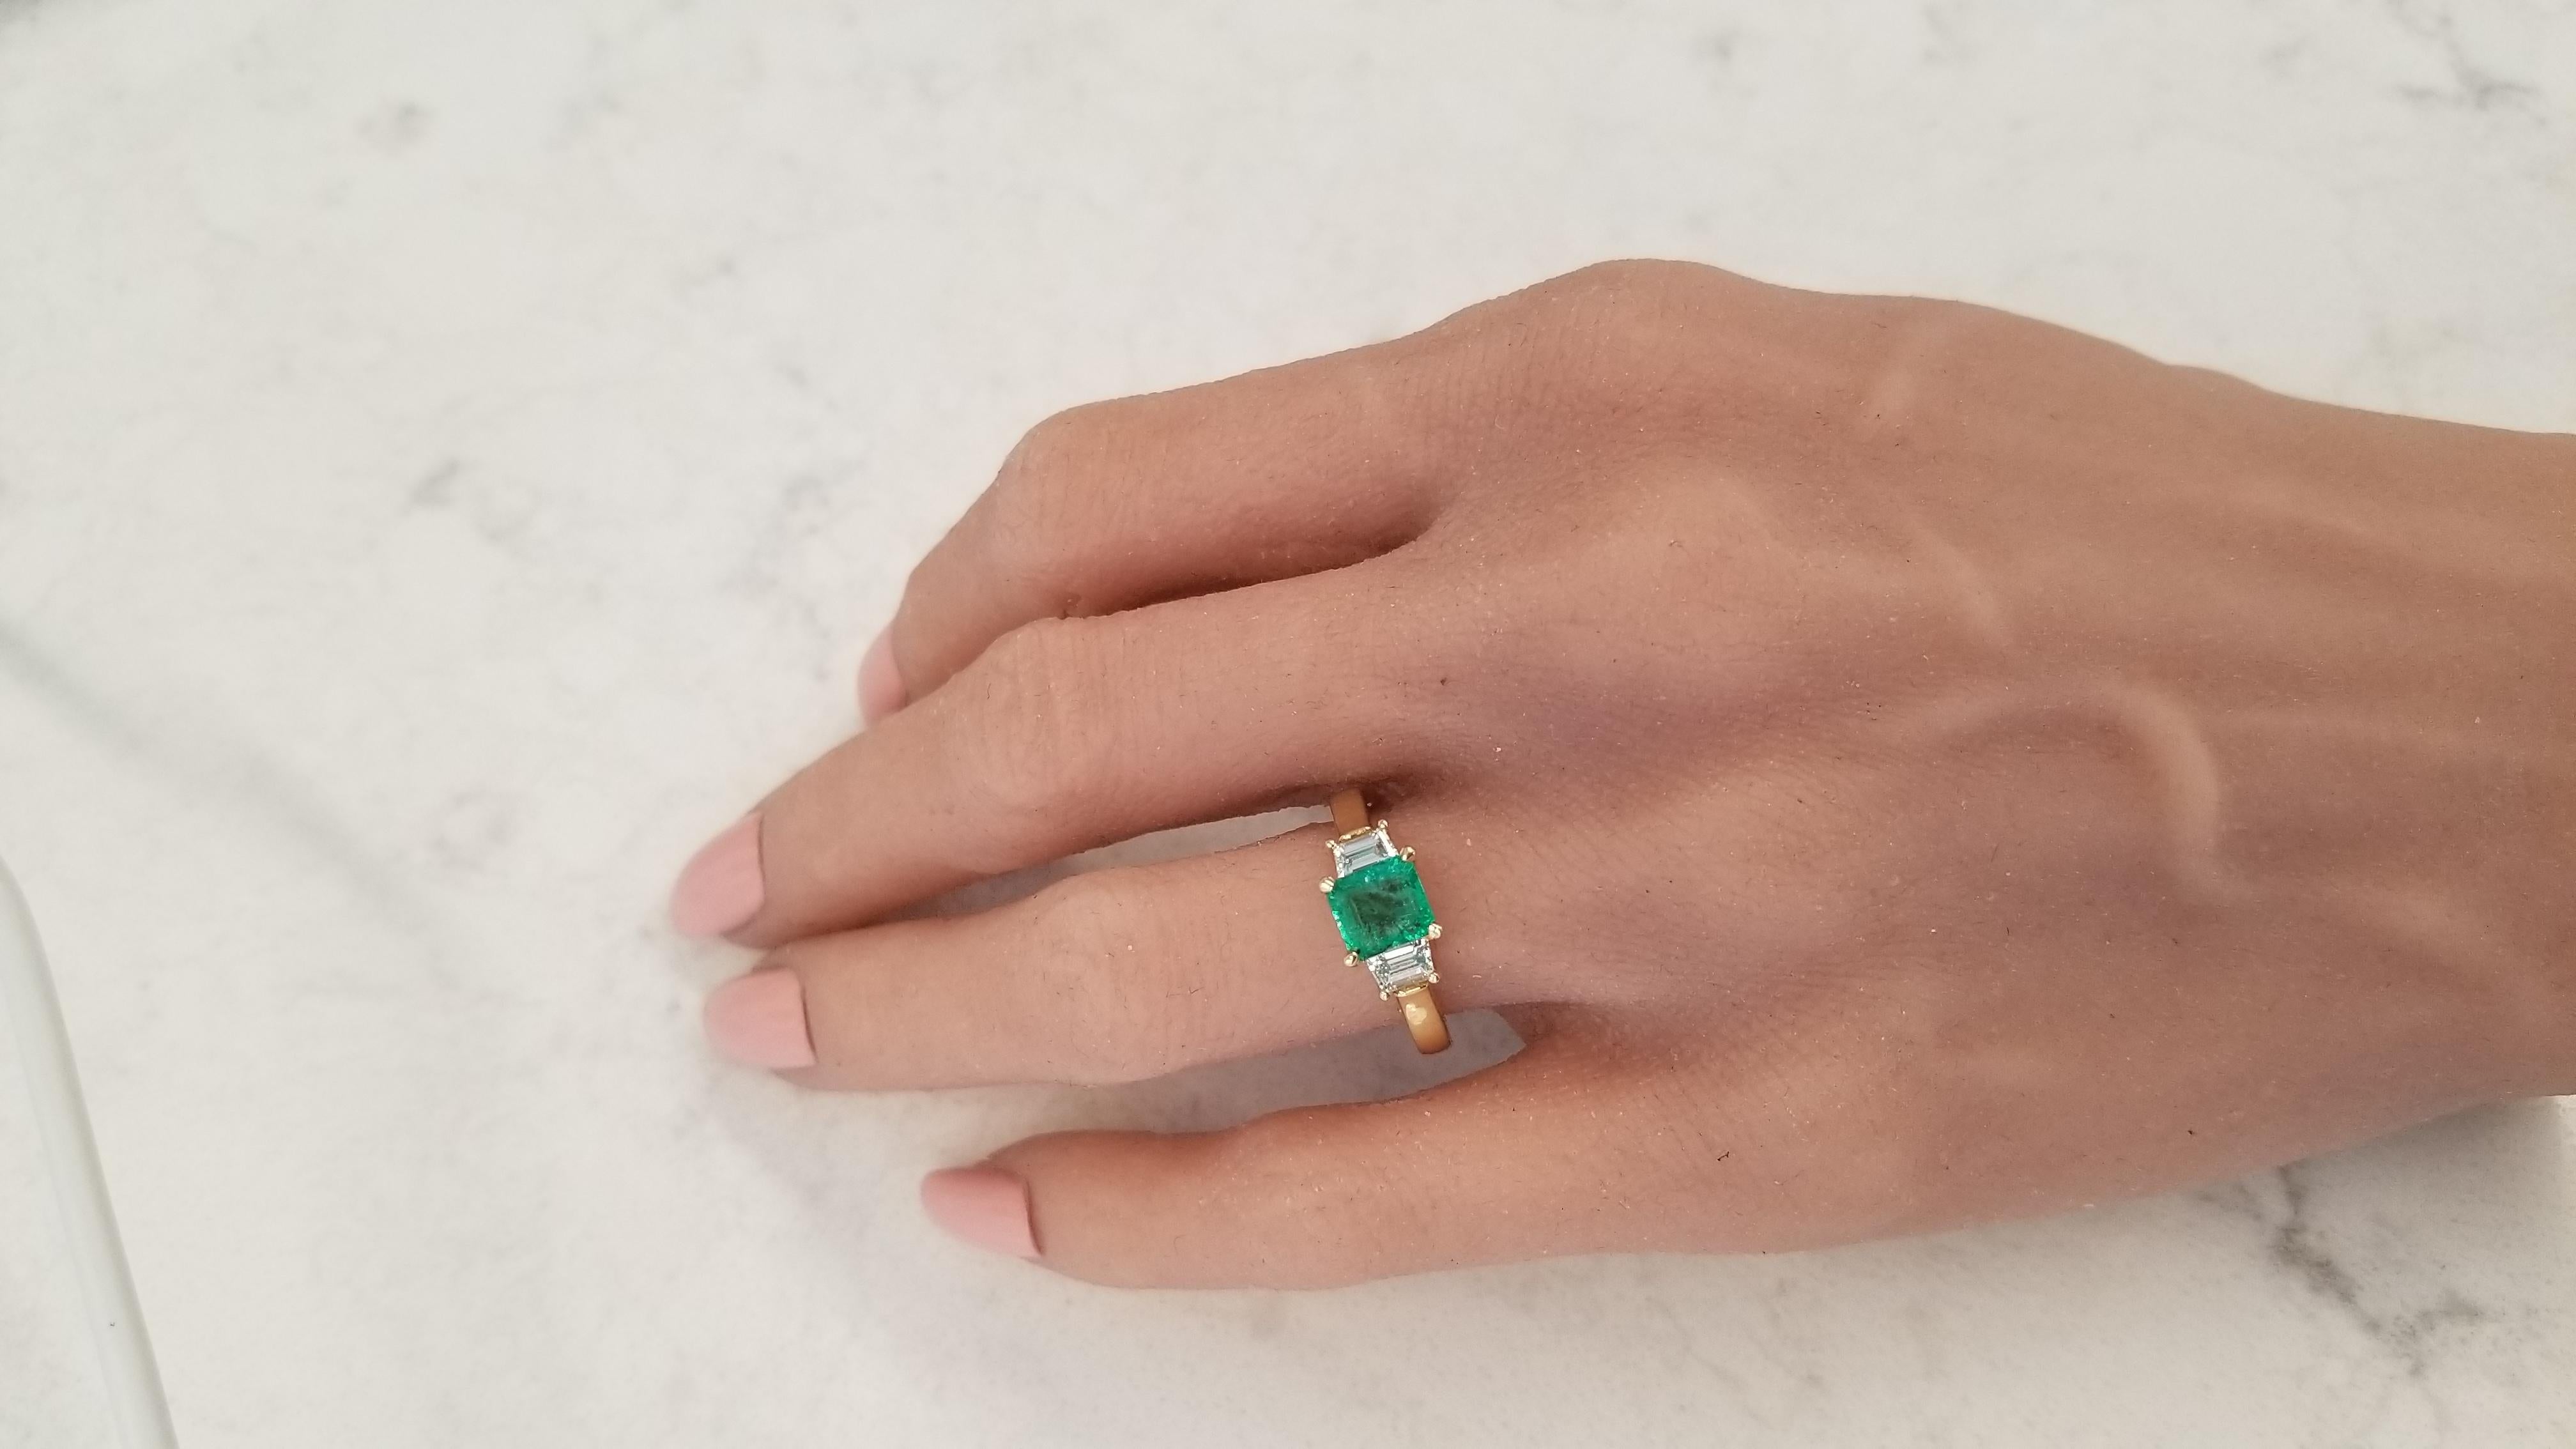 This three stone ring showcases a 1.37 carat square emerald cut green emerald, prong set, that measures 6.2x5.8MM. The gem source is Zambia; its color is evenly distributed throughout the gem; its luster and transparency are excellent. This emerald